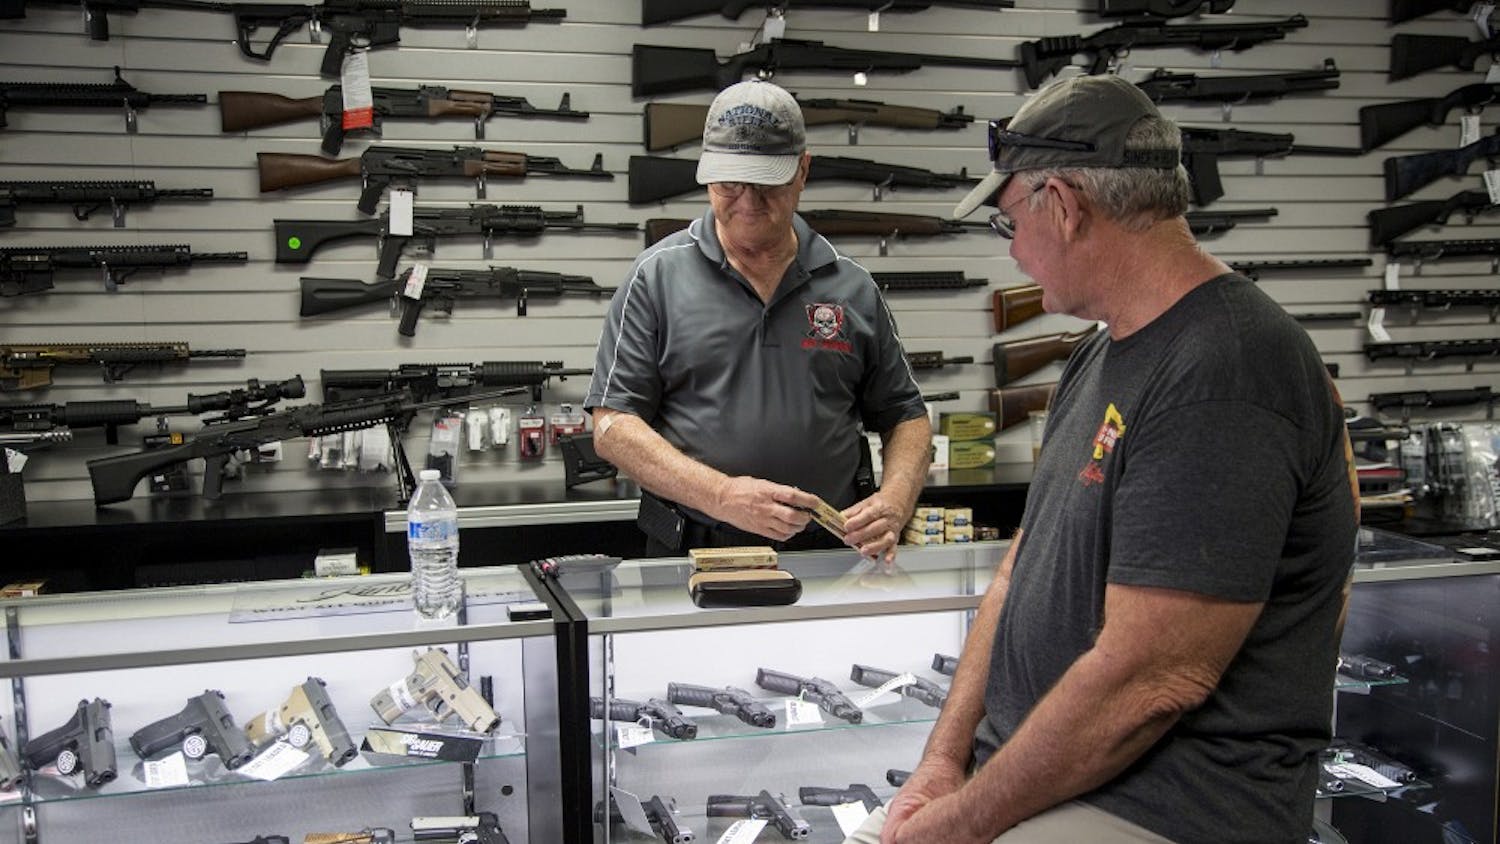 Mike Fiorille, business partner at Get Loaded, serves a customer at the gun store on June 30, 2016, in Grand Terrace, Calif. State lawmakers on Friday, Sept. 1, 2017, gutted a measure that would have limited rifle purchases in the state. (Gina Ferazzi/Los Angeles Times/TNS)